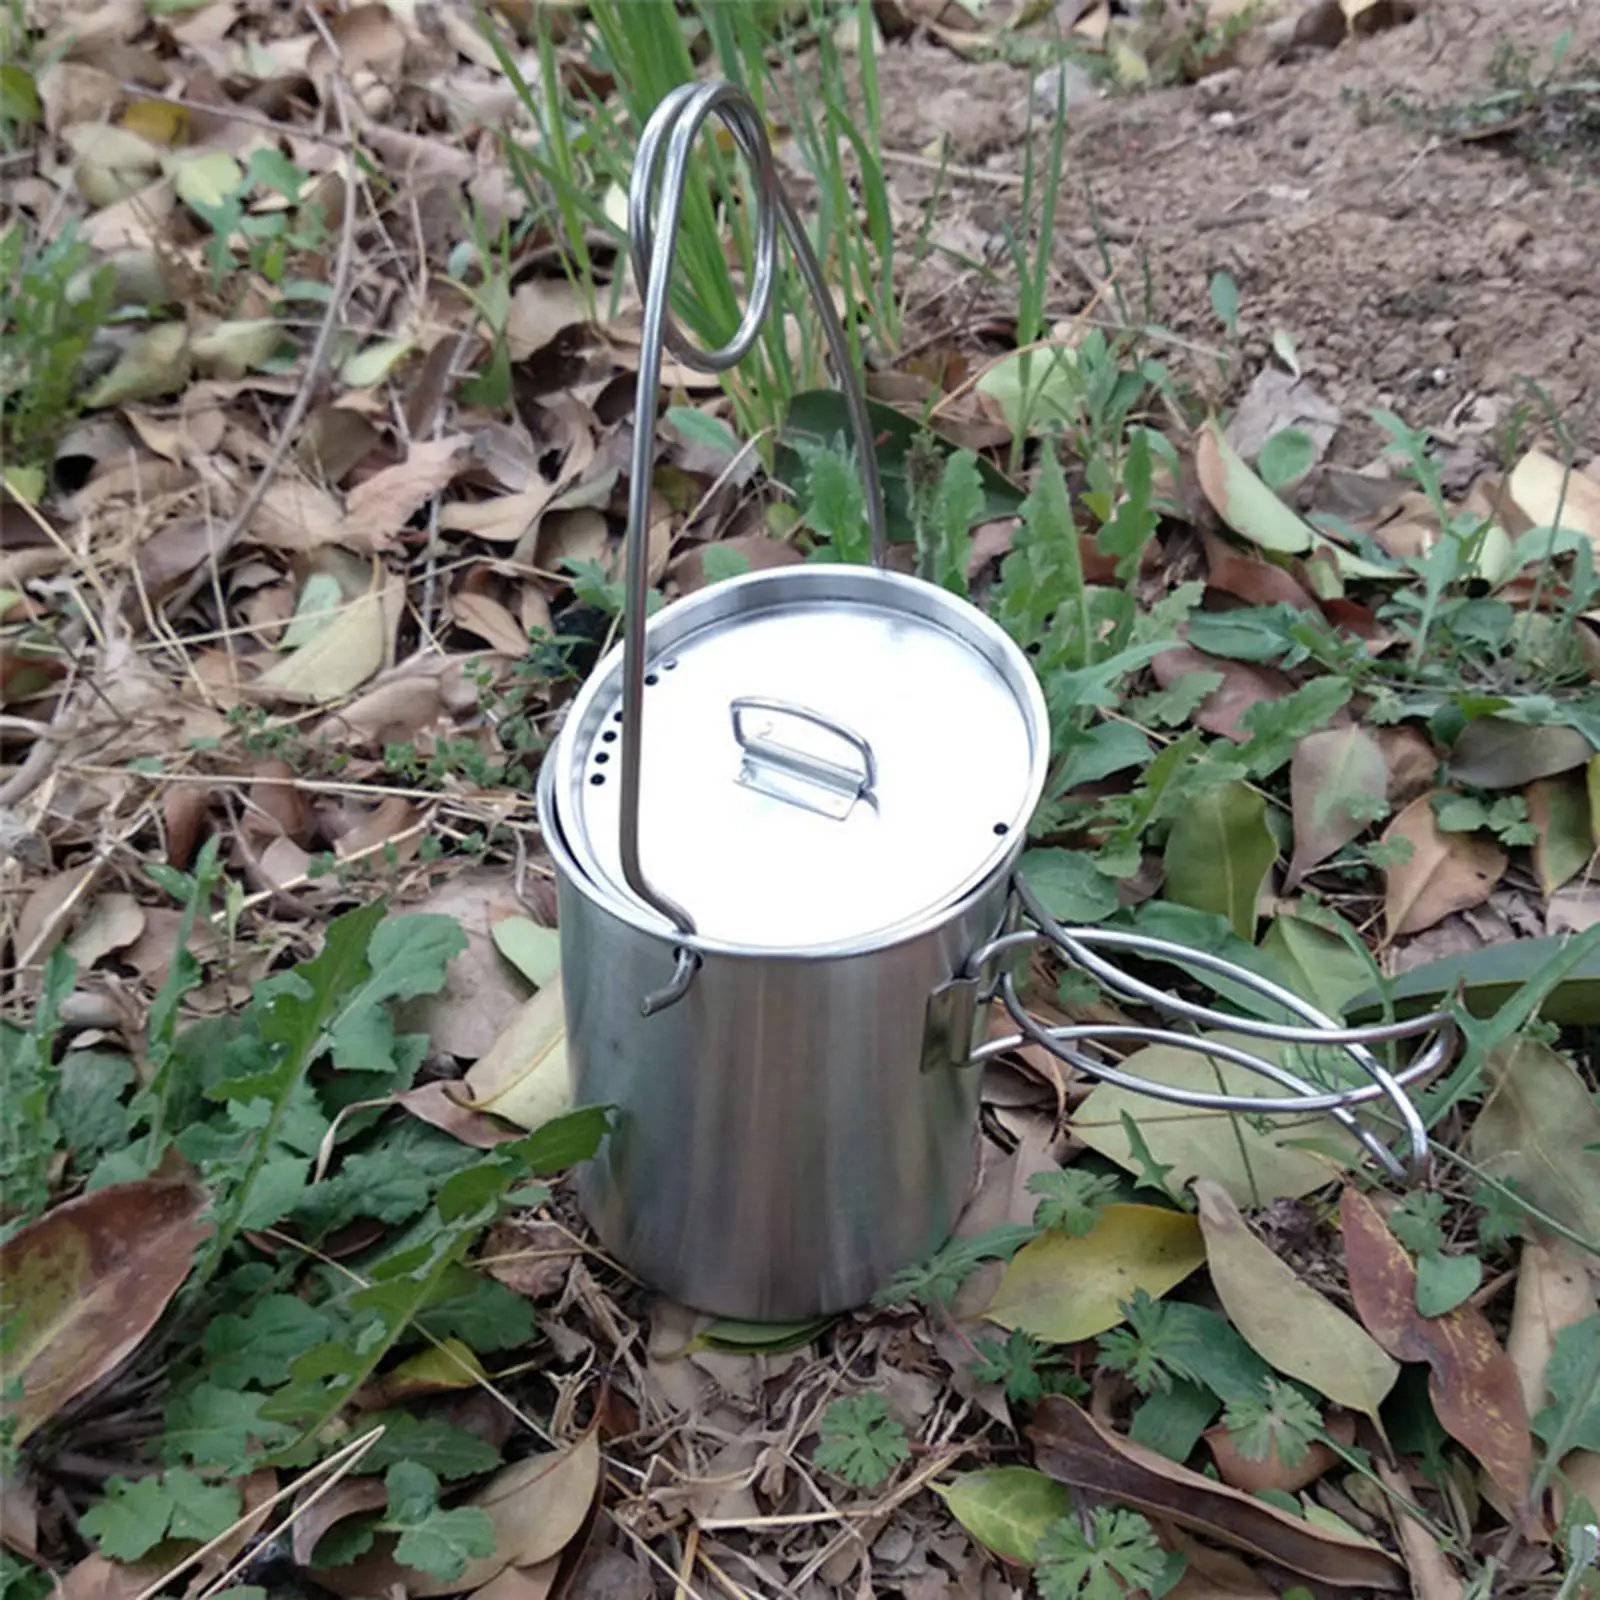 Portable Camping  Mug  Stainless Steel Utensils Lightweight Reusable Heating for Cooking Hiking Picnic